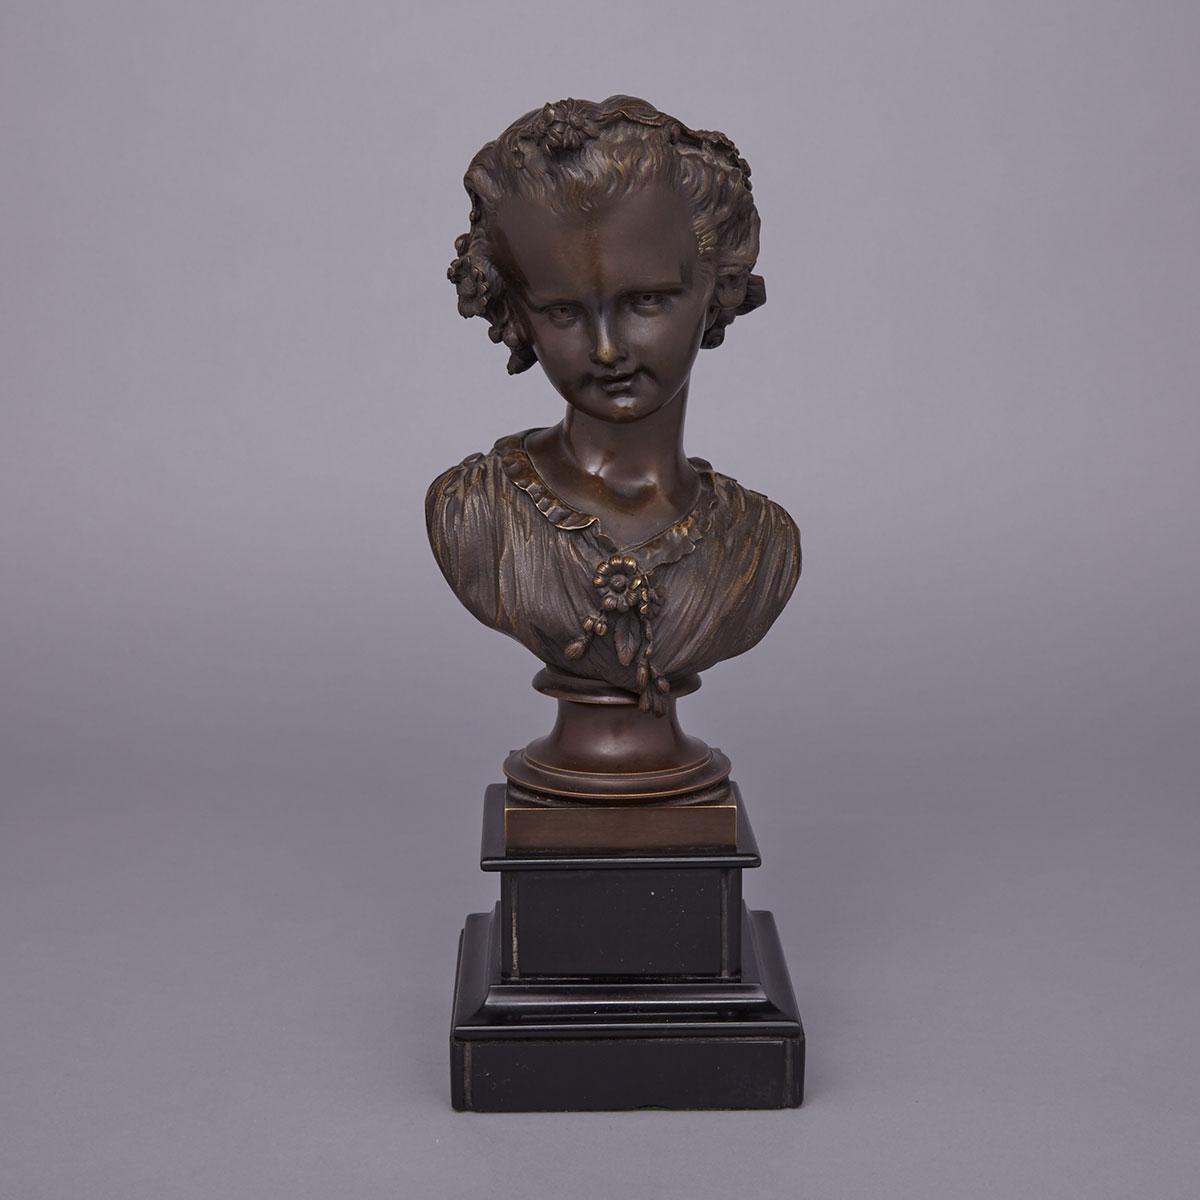 Small French Bronze Bust of a Young Girl, after the model by Émile Victor Blavier (b.1821), late 19th century